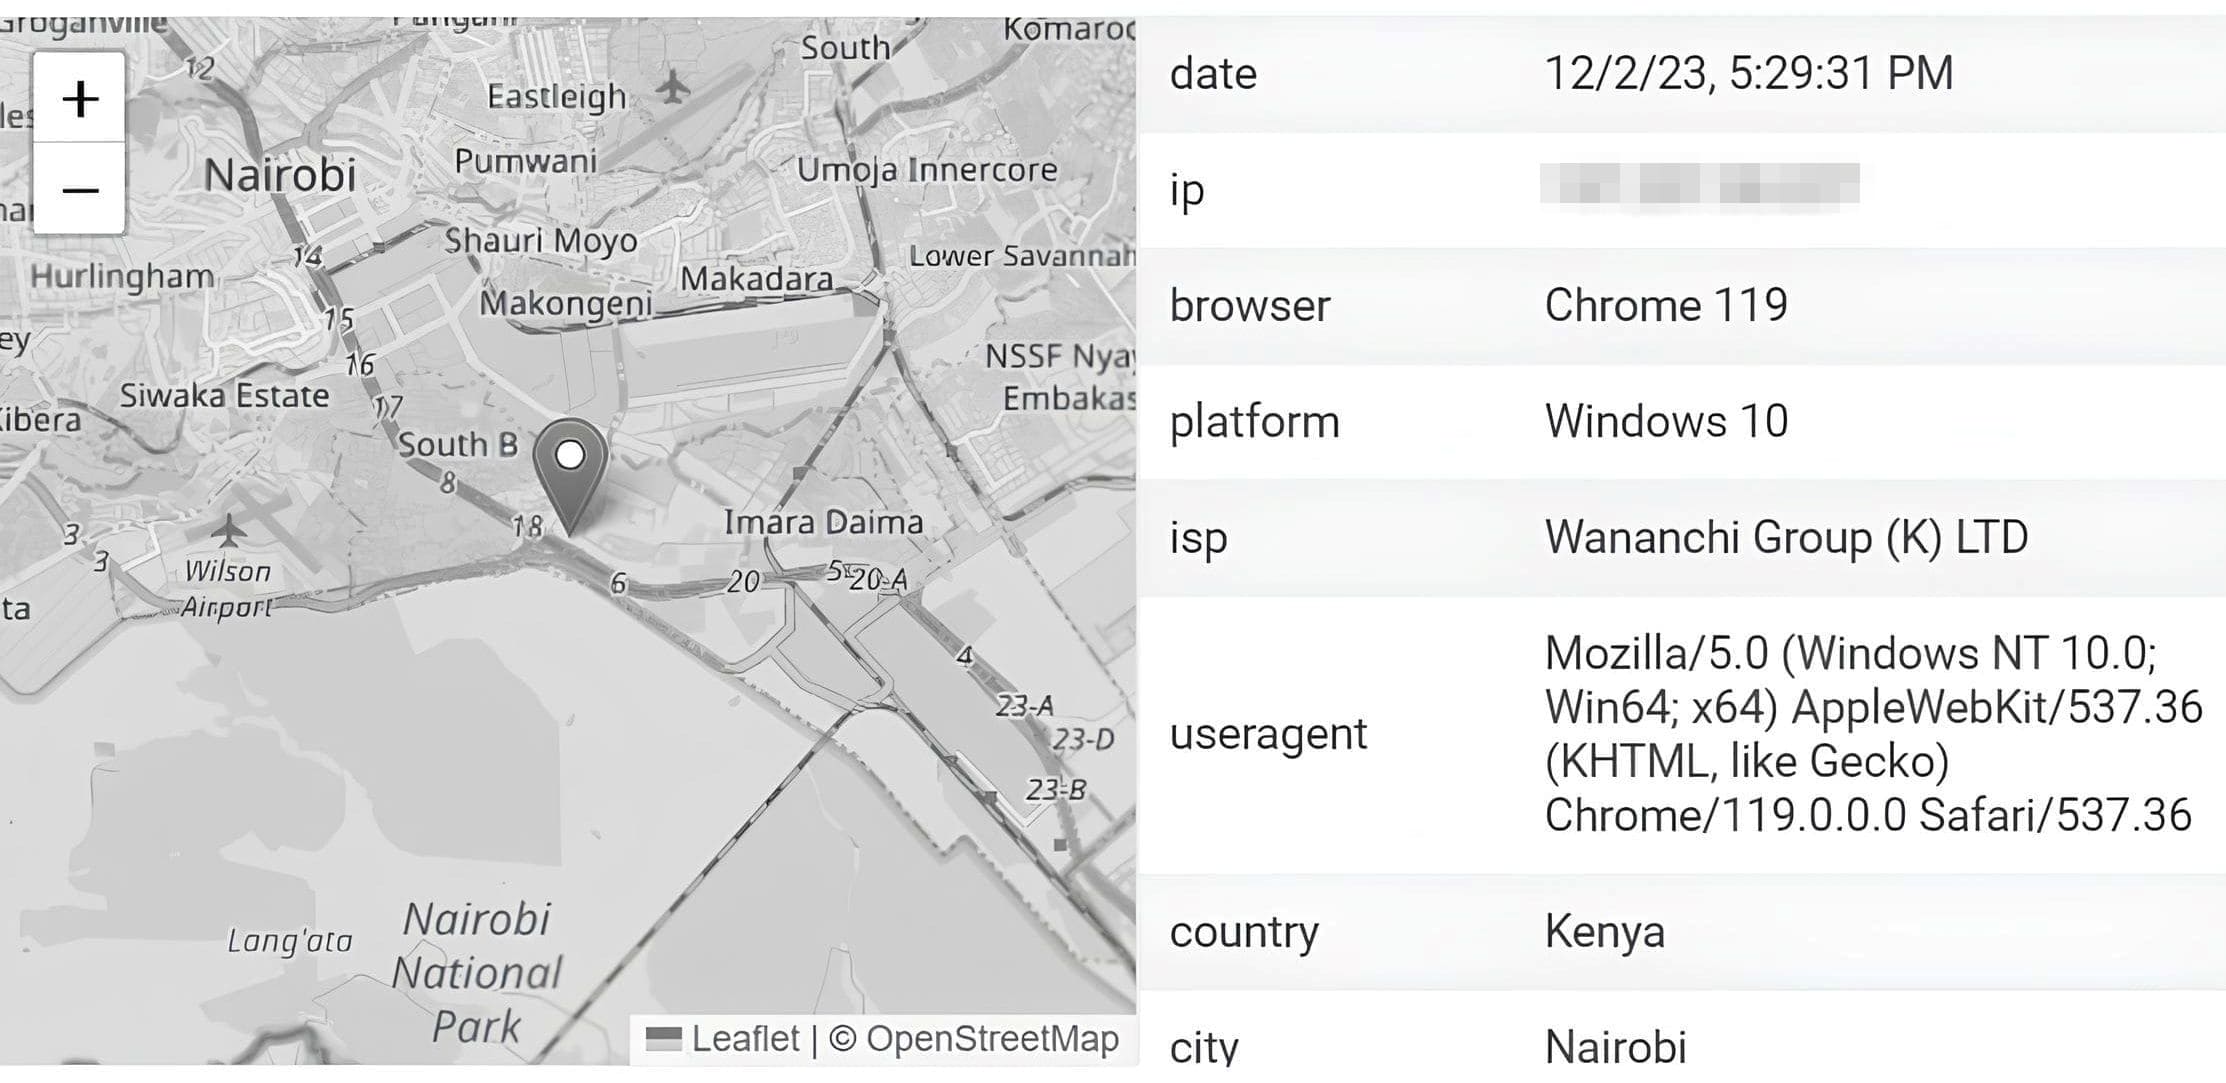 An image of IPLogger showing a tracked location